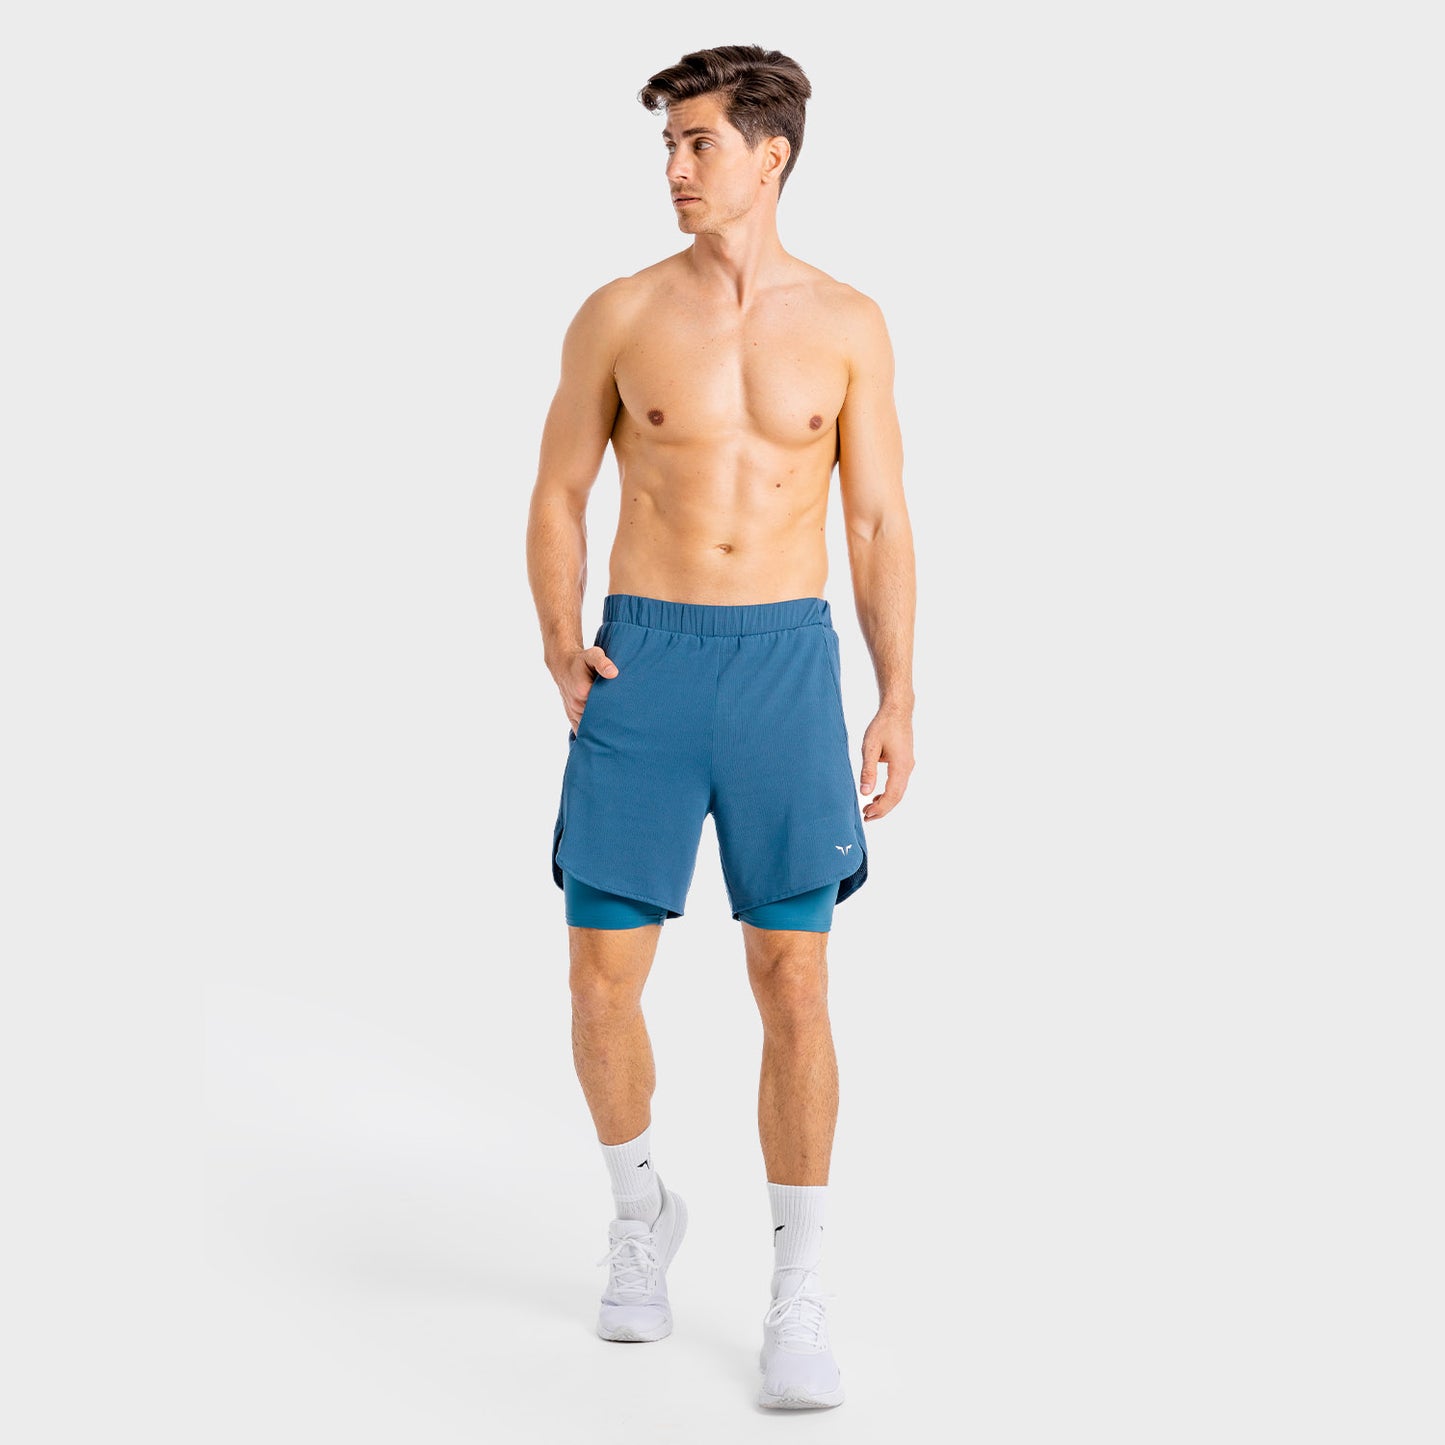 squatwolf-workout-short-for-men-core-mesh-2-in-1-shorts-slate-gym-wear